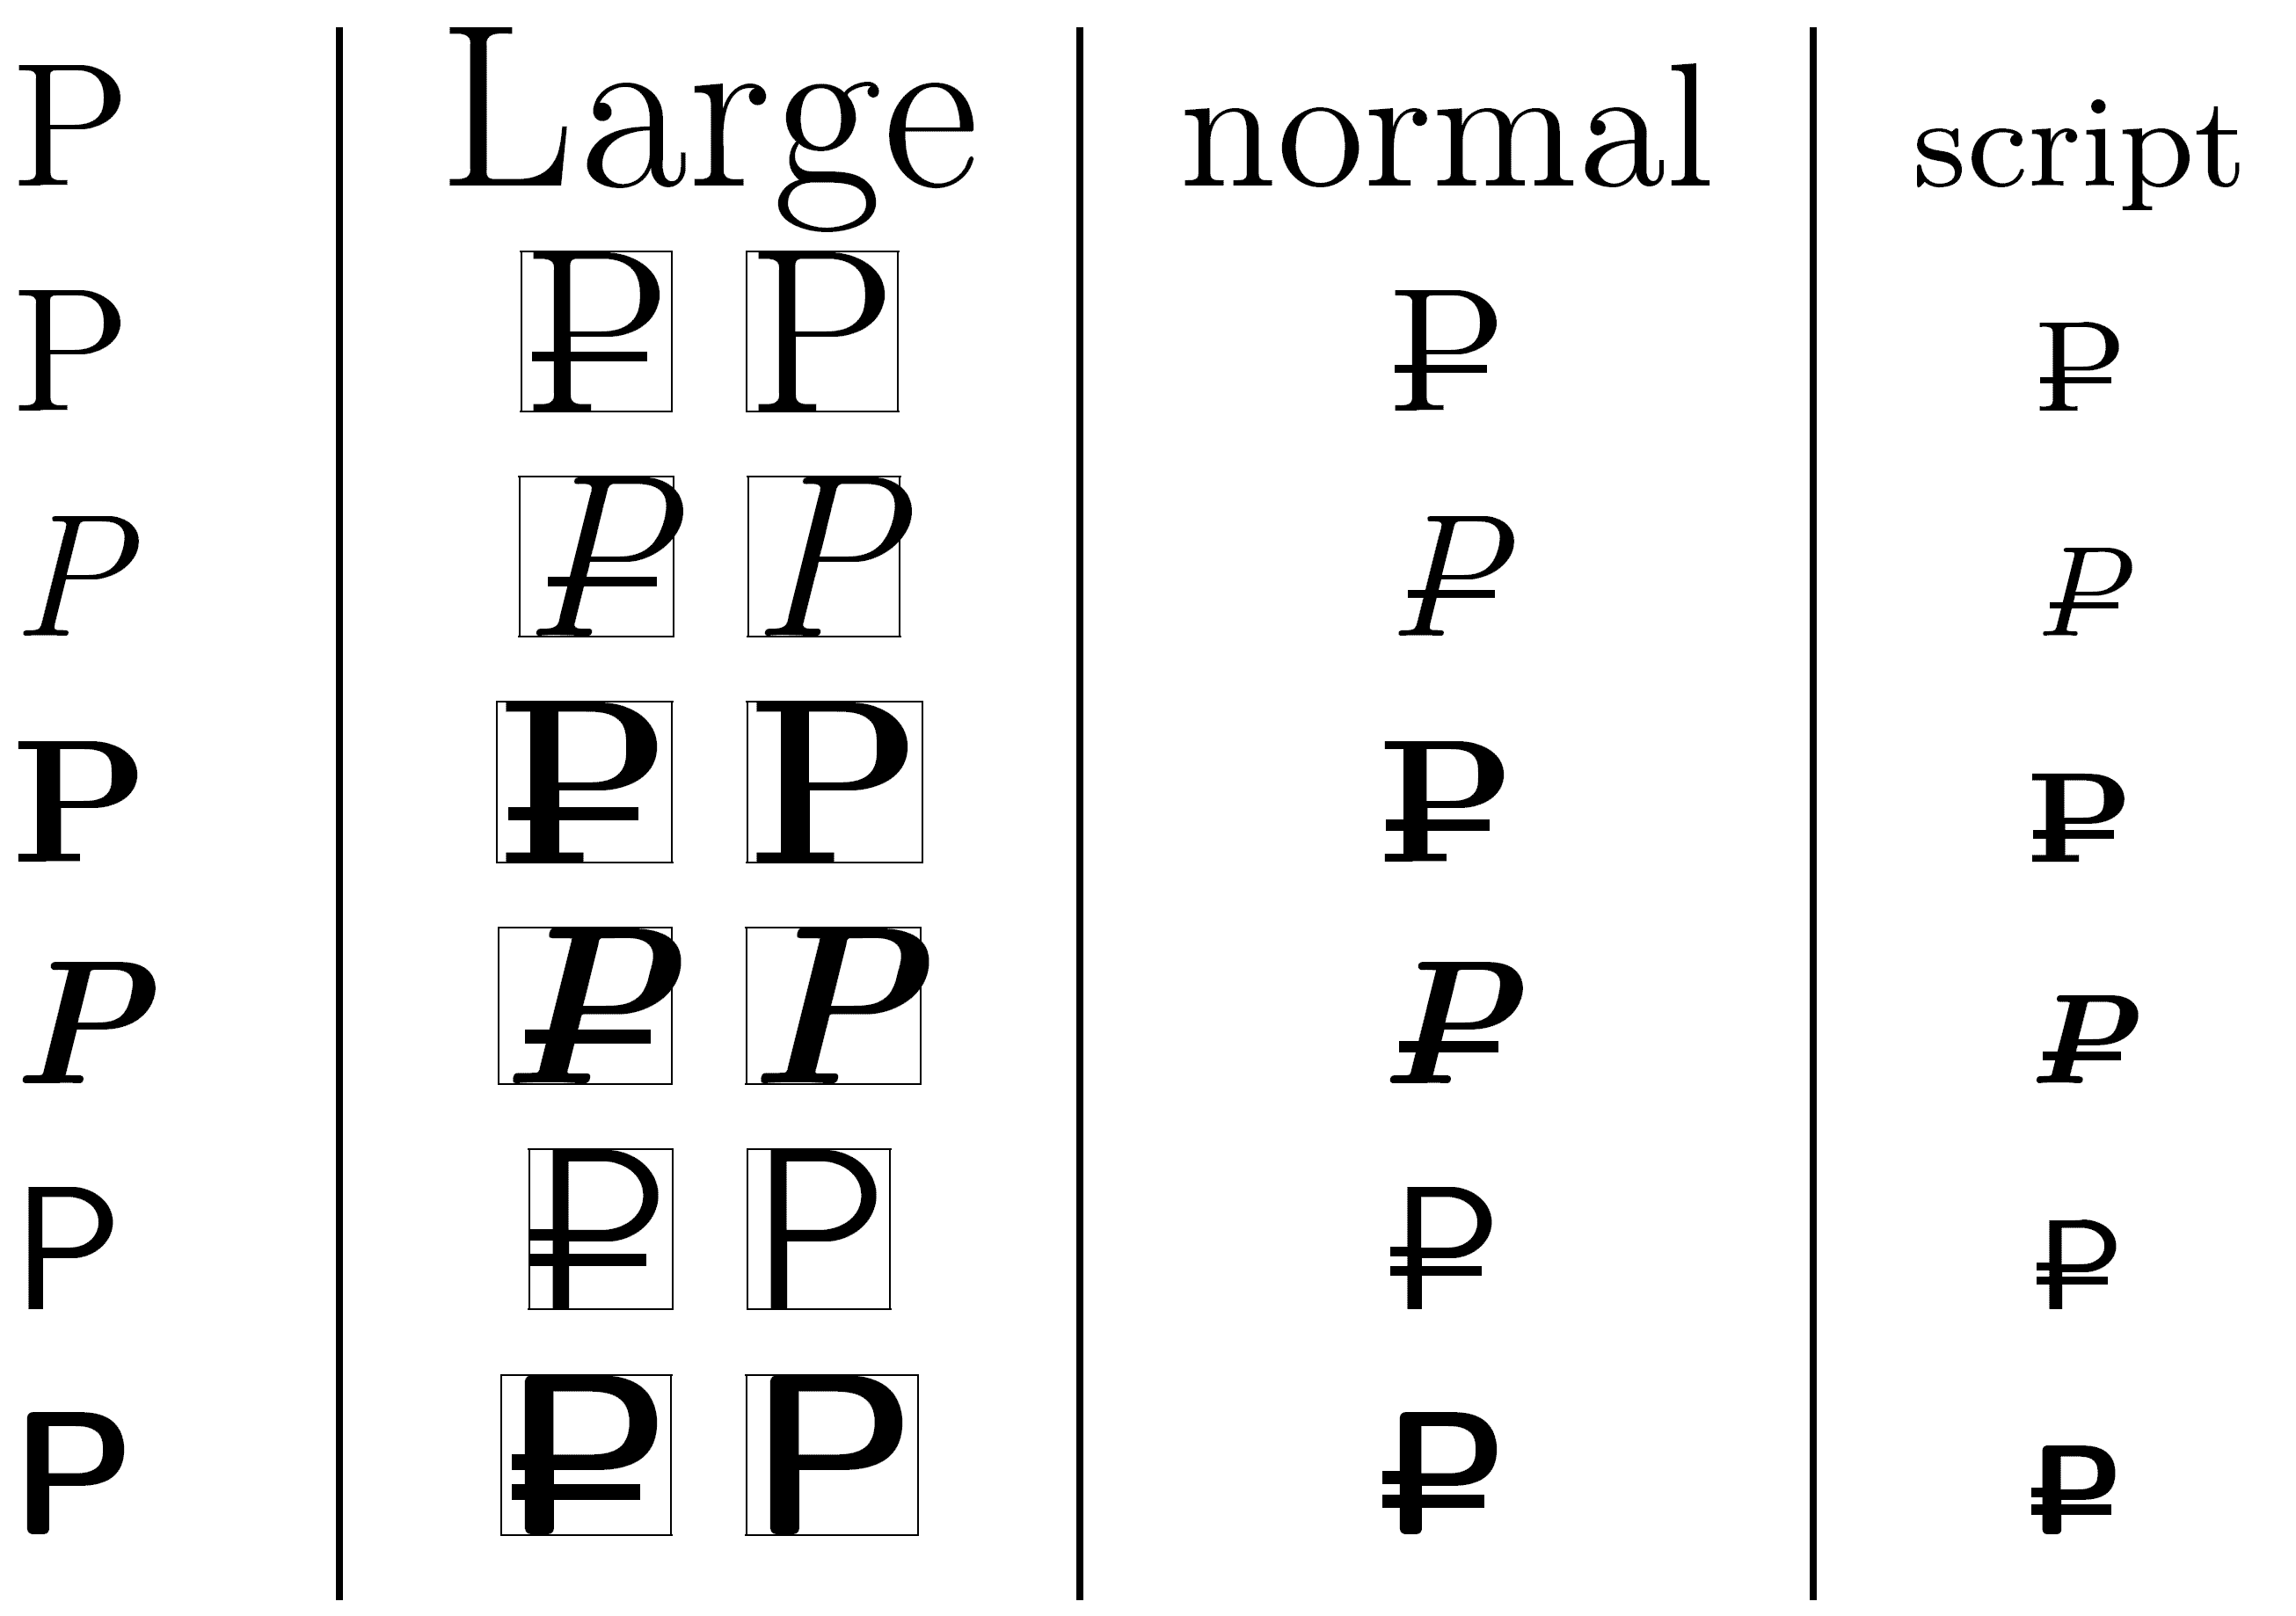 rouble sign variants in LaTeX